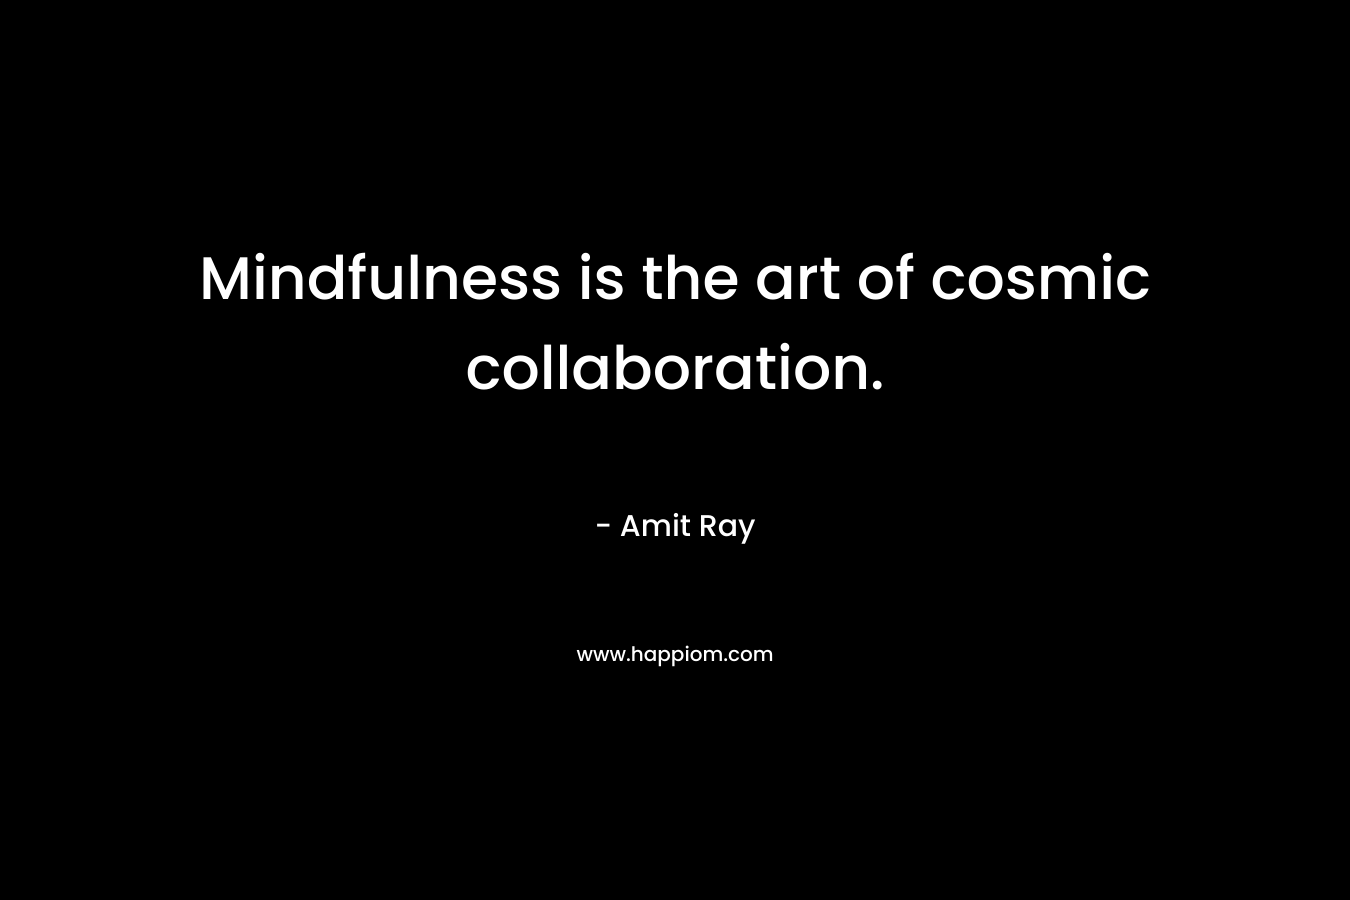 Mindfulness is the art of cosmic collaboration. – Amit Ray